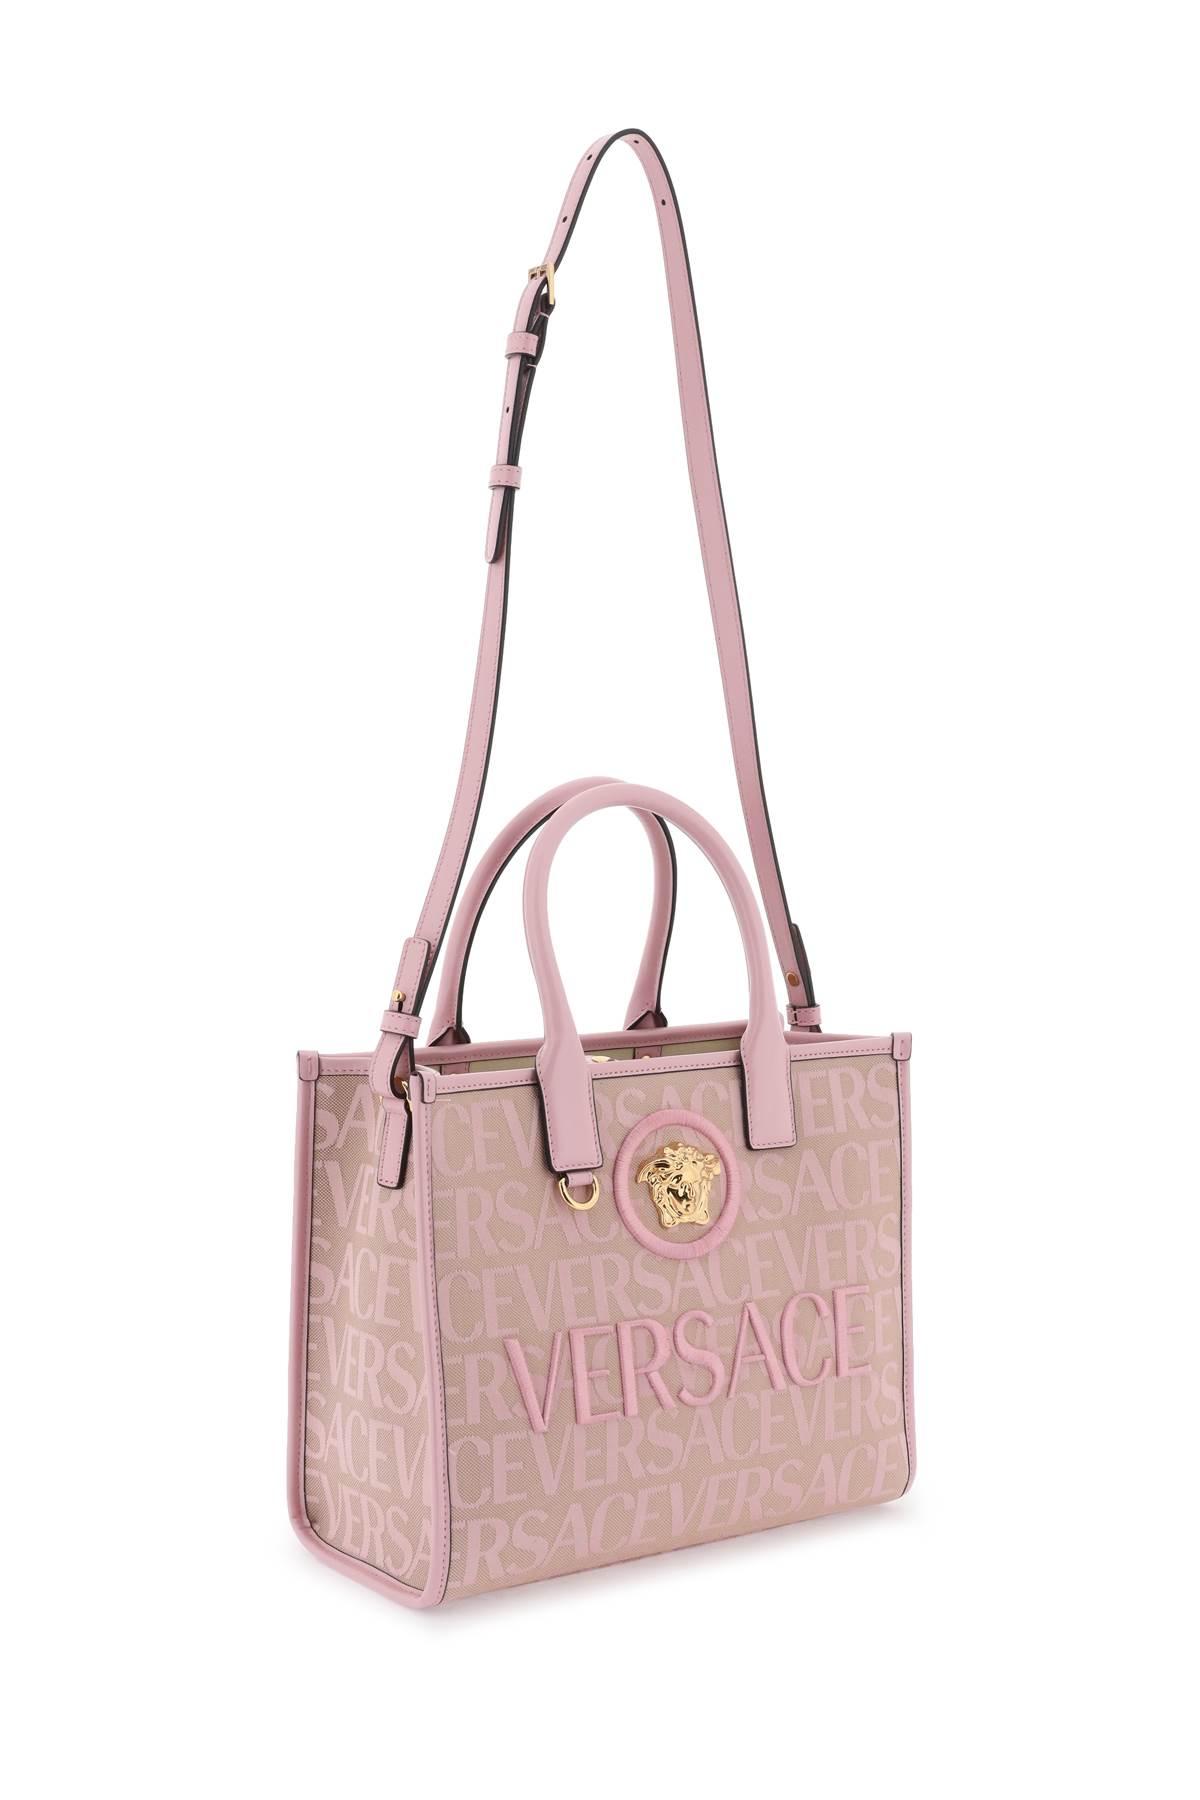 Versace Allover small tote bag - Realry: A global fashion sites aggregator